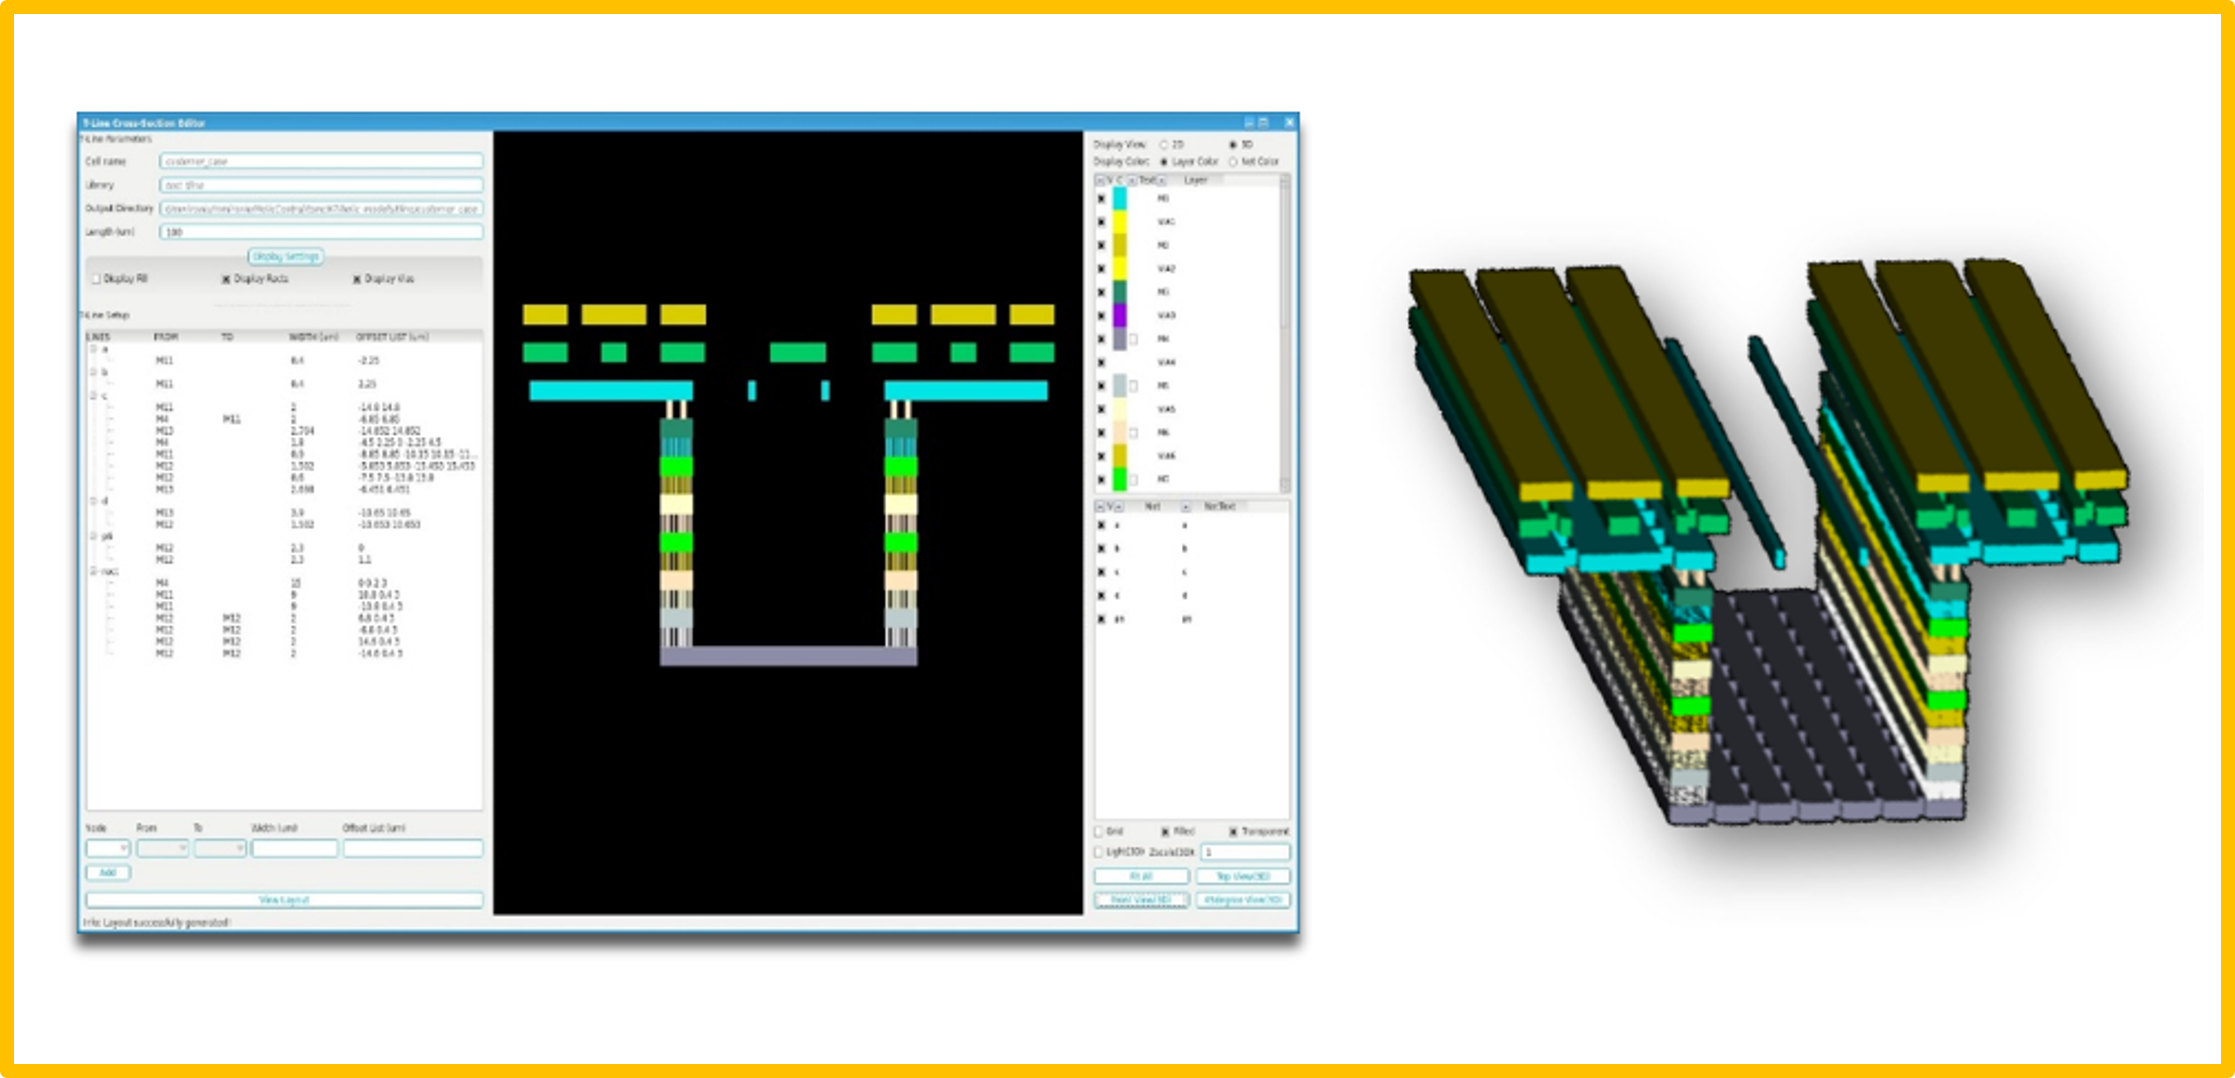 Bus Builder interface with cross-sectional and 3D views; inductors; velocerf